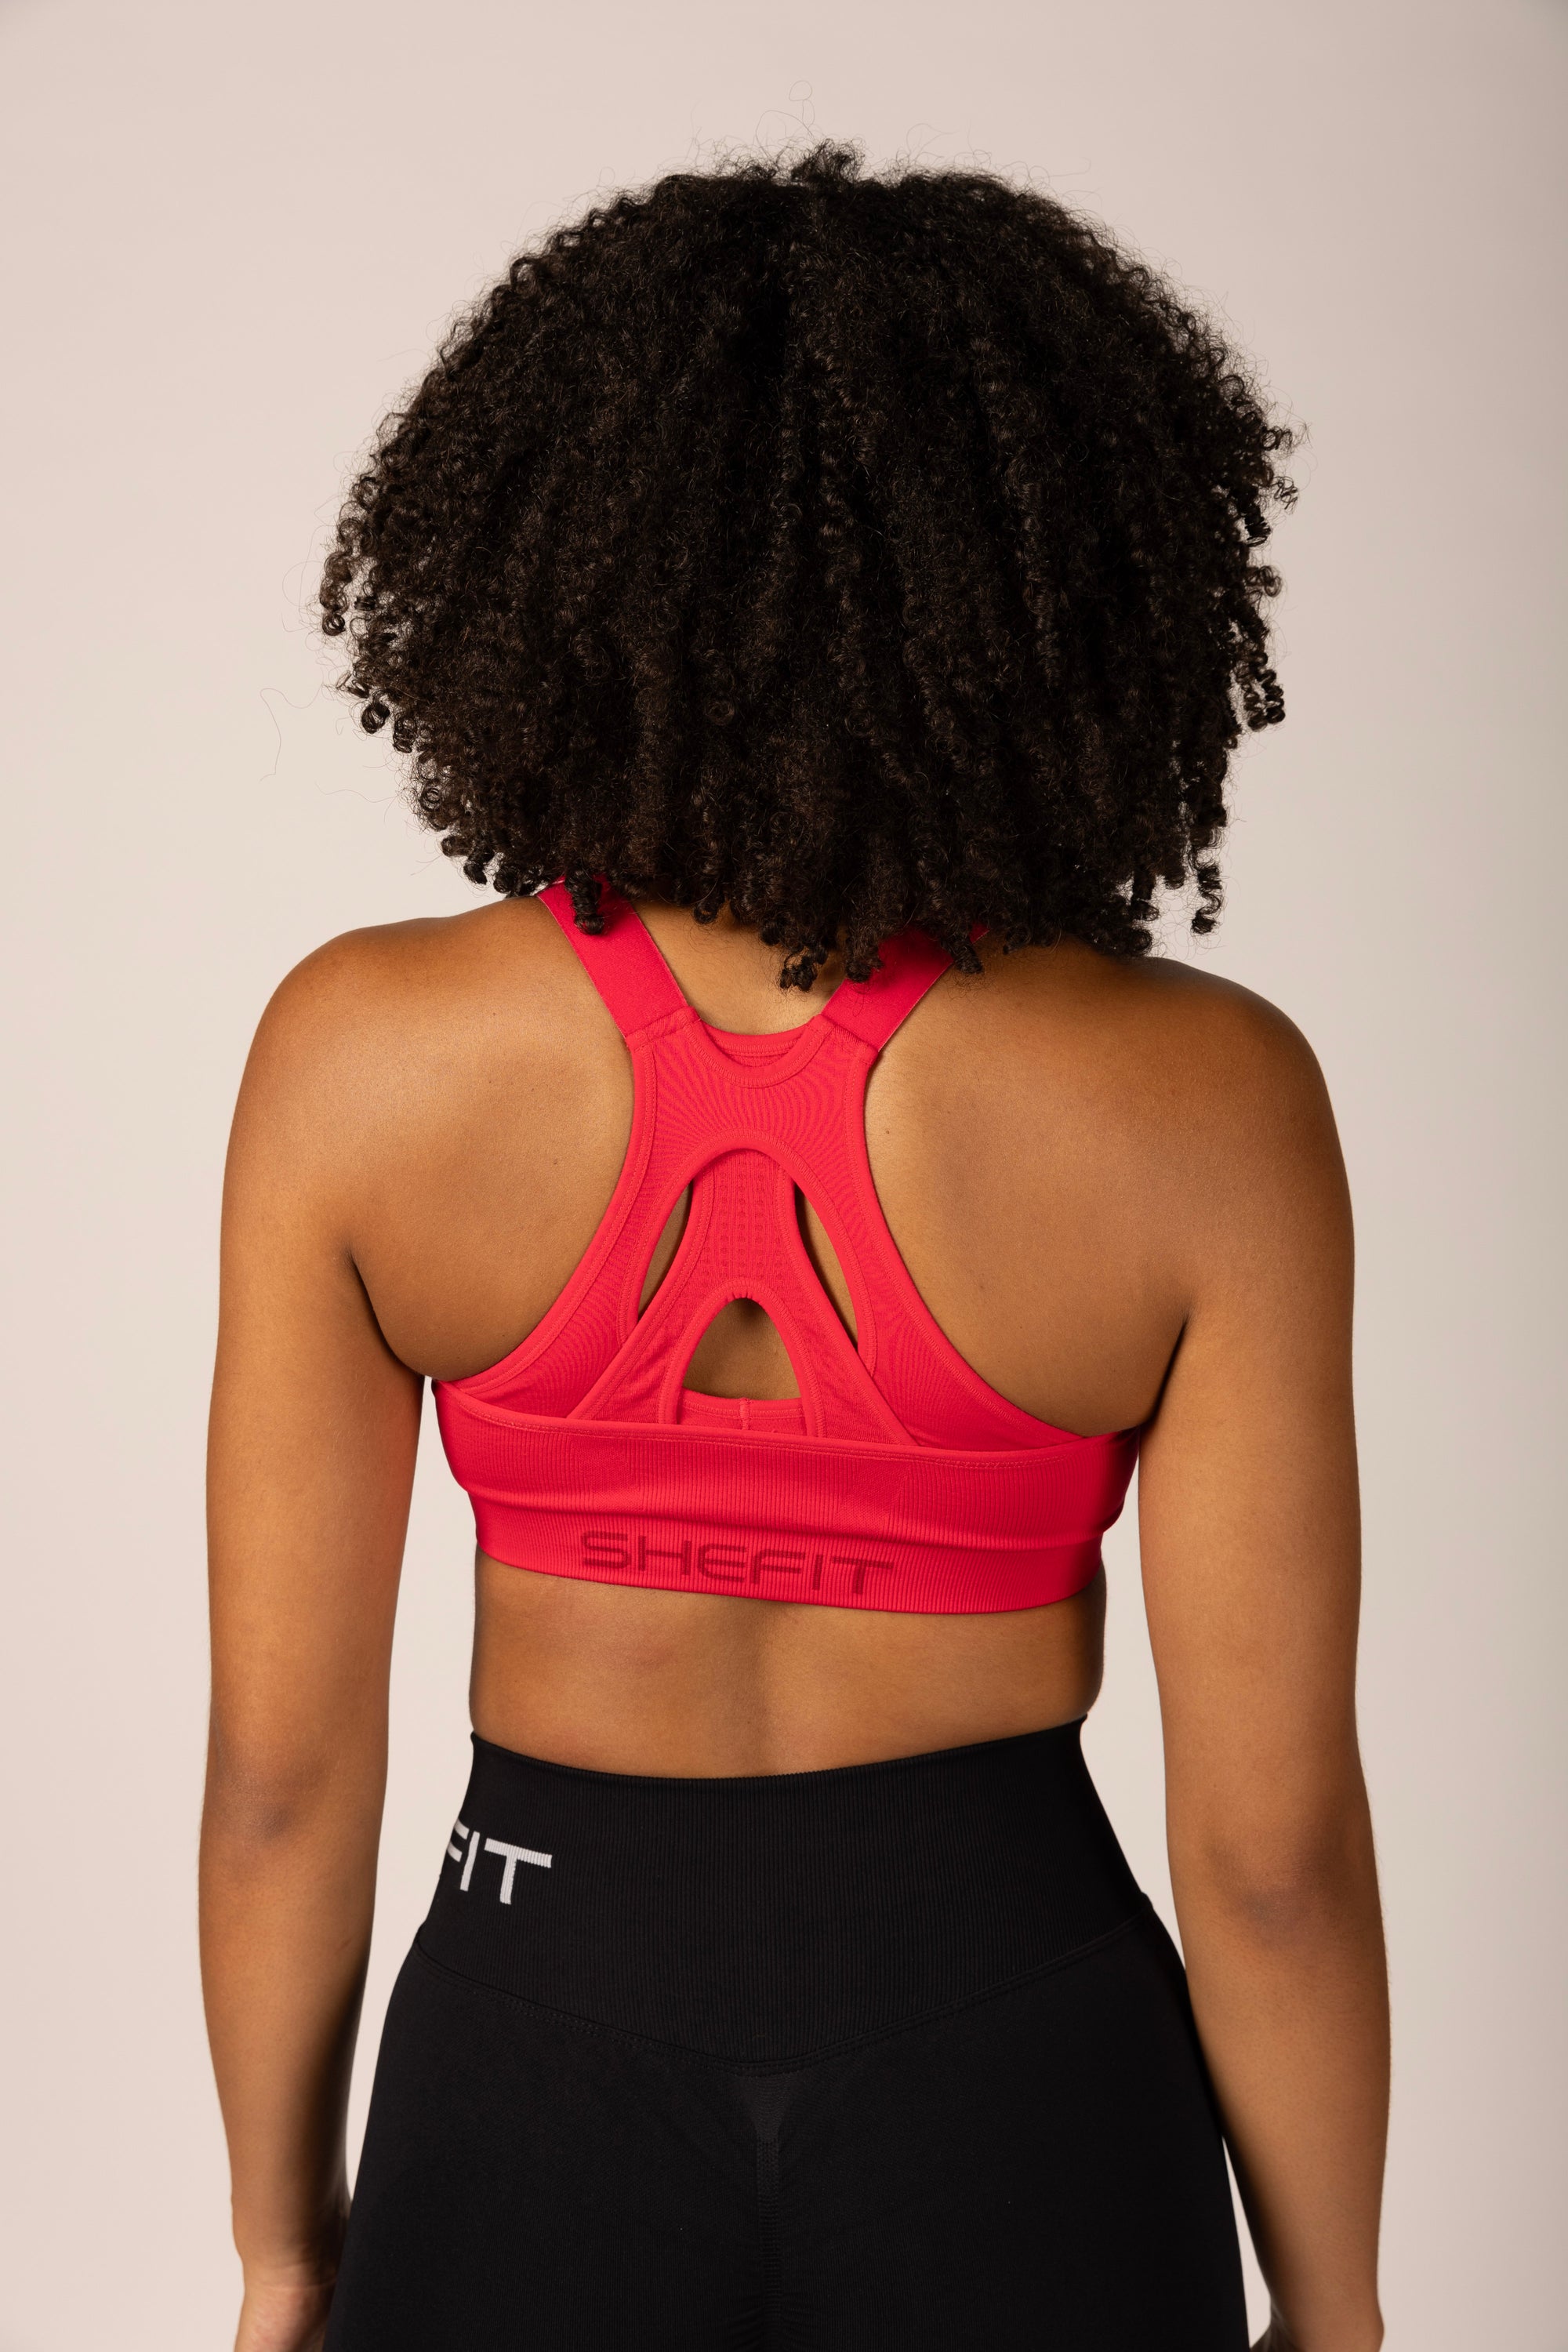 The Sports Bra Project - SHEFIT has a history of working with and